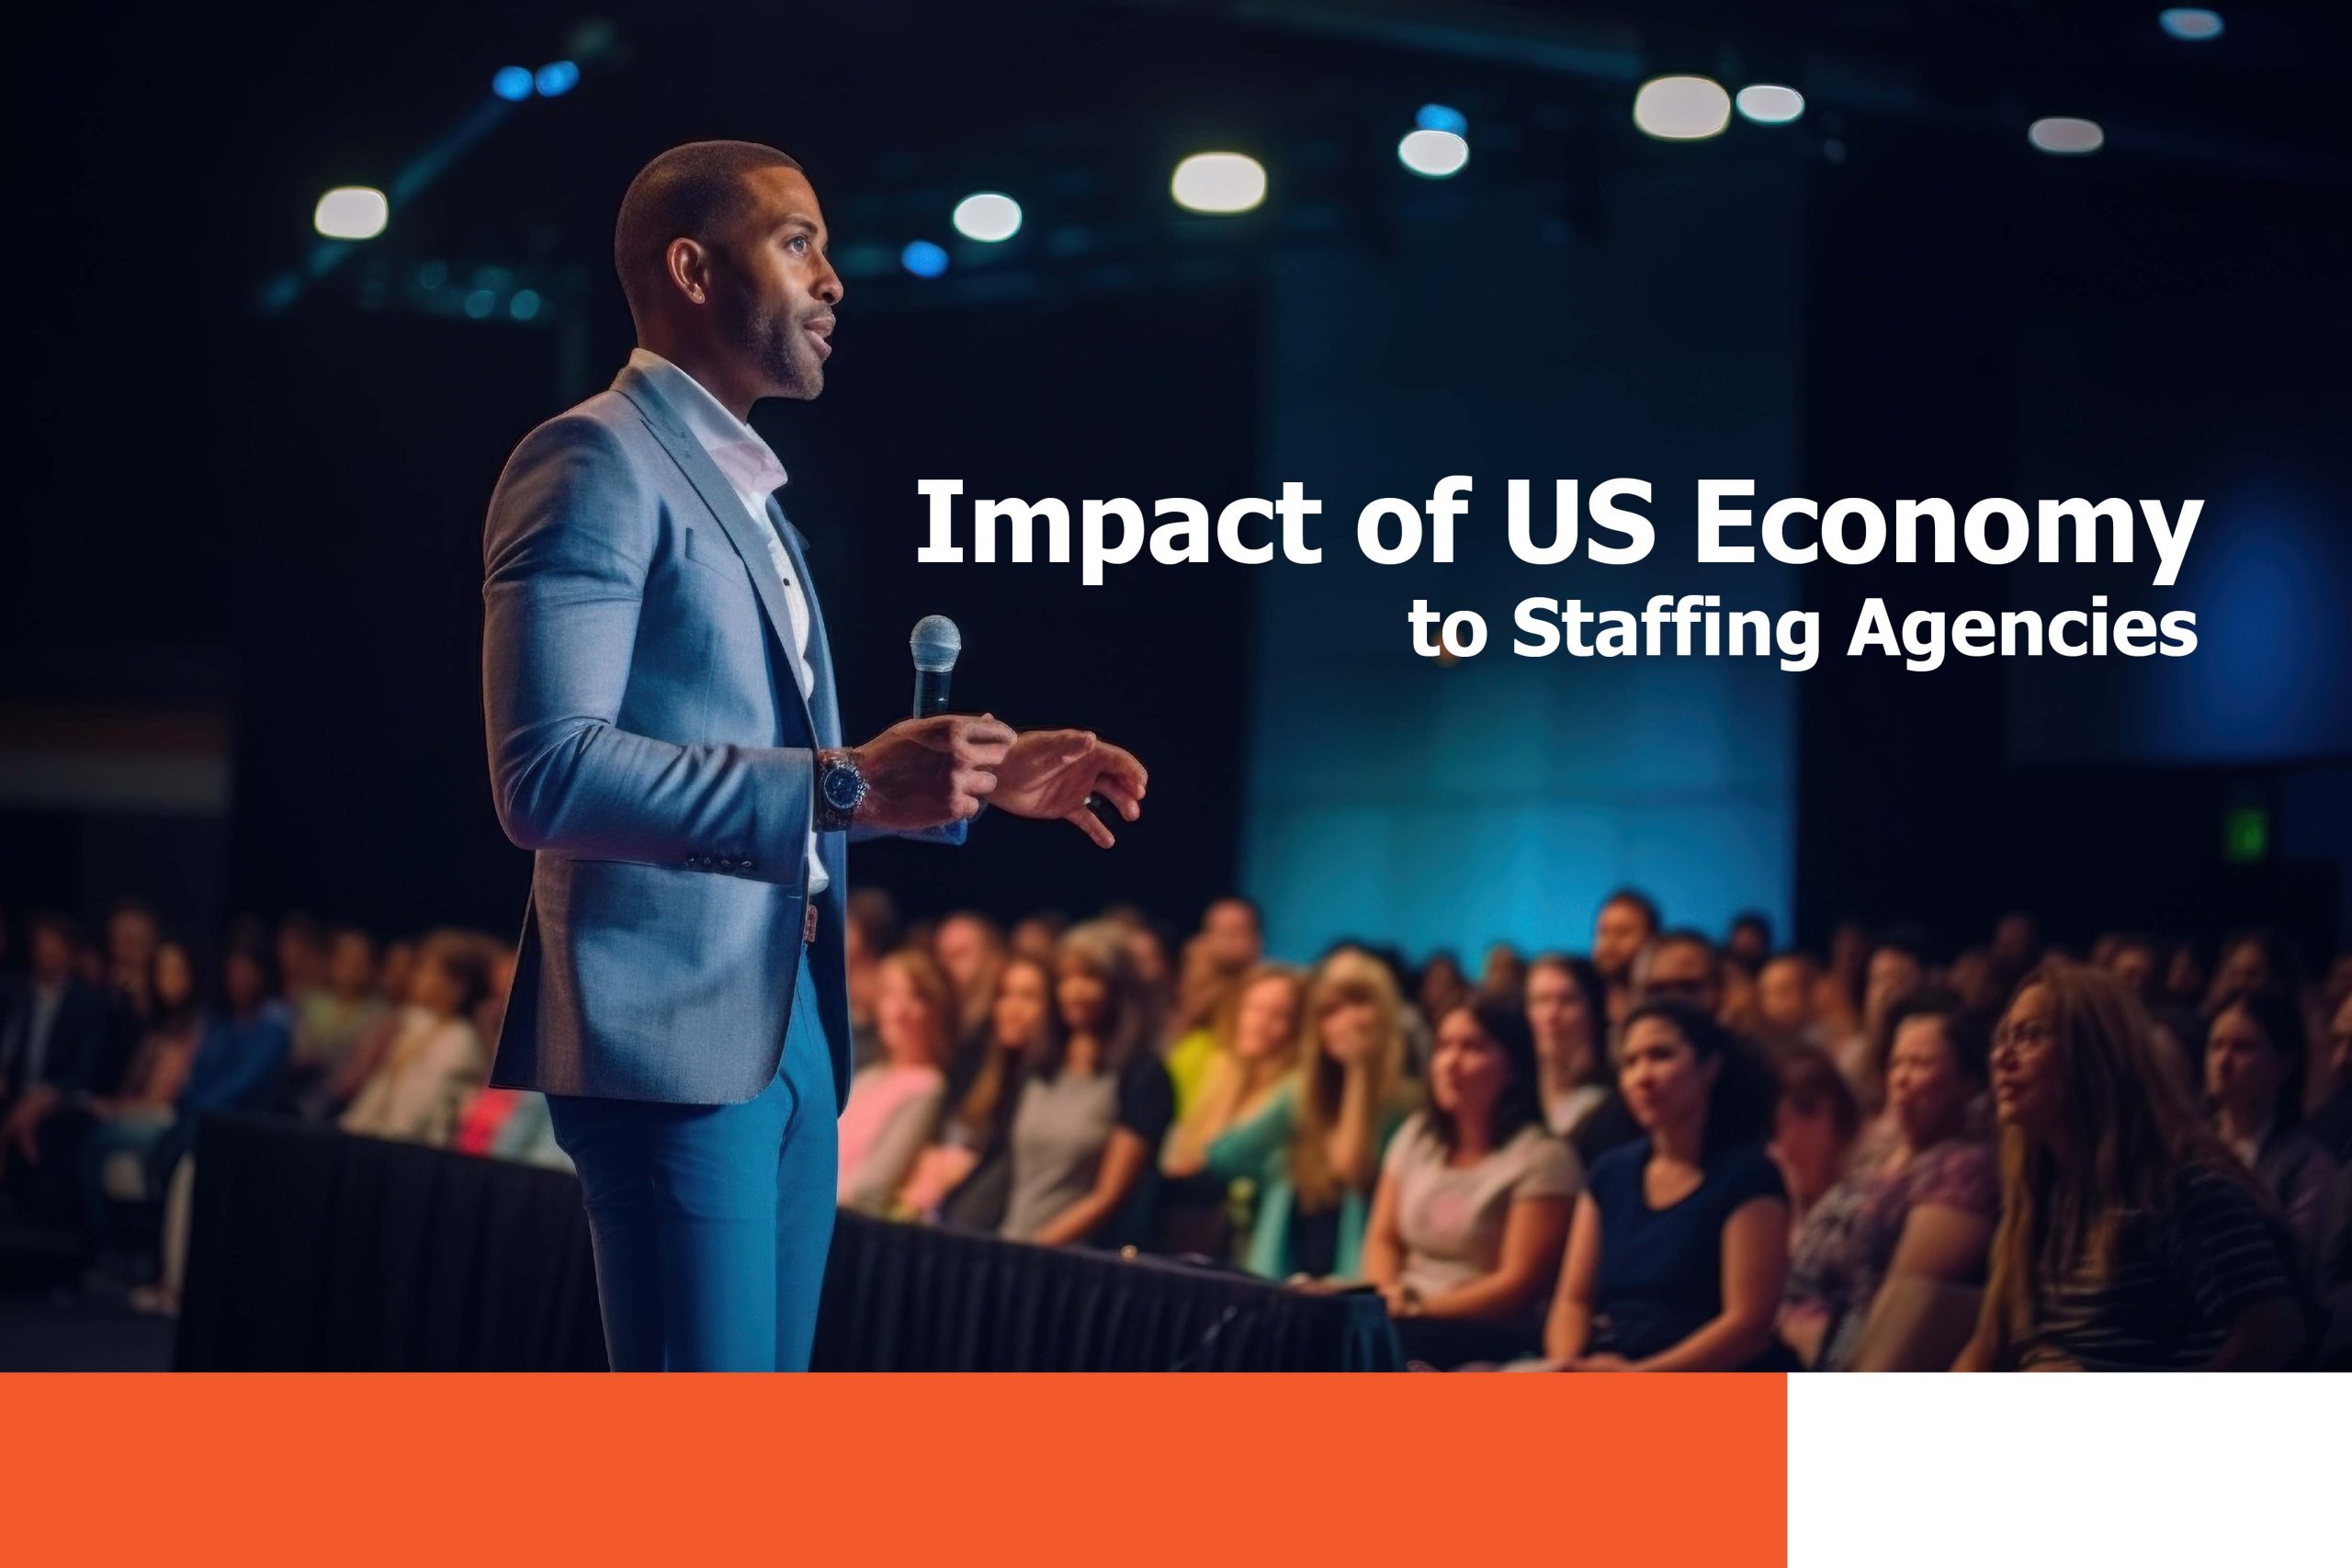 Impact of the US Economy to Recruiting and Staffing Agencies